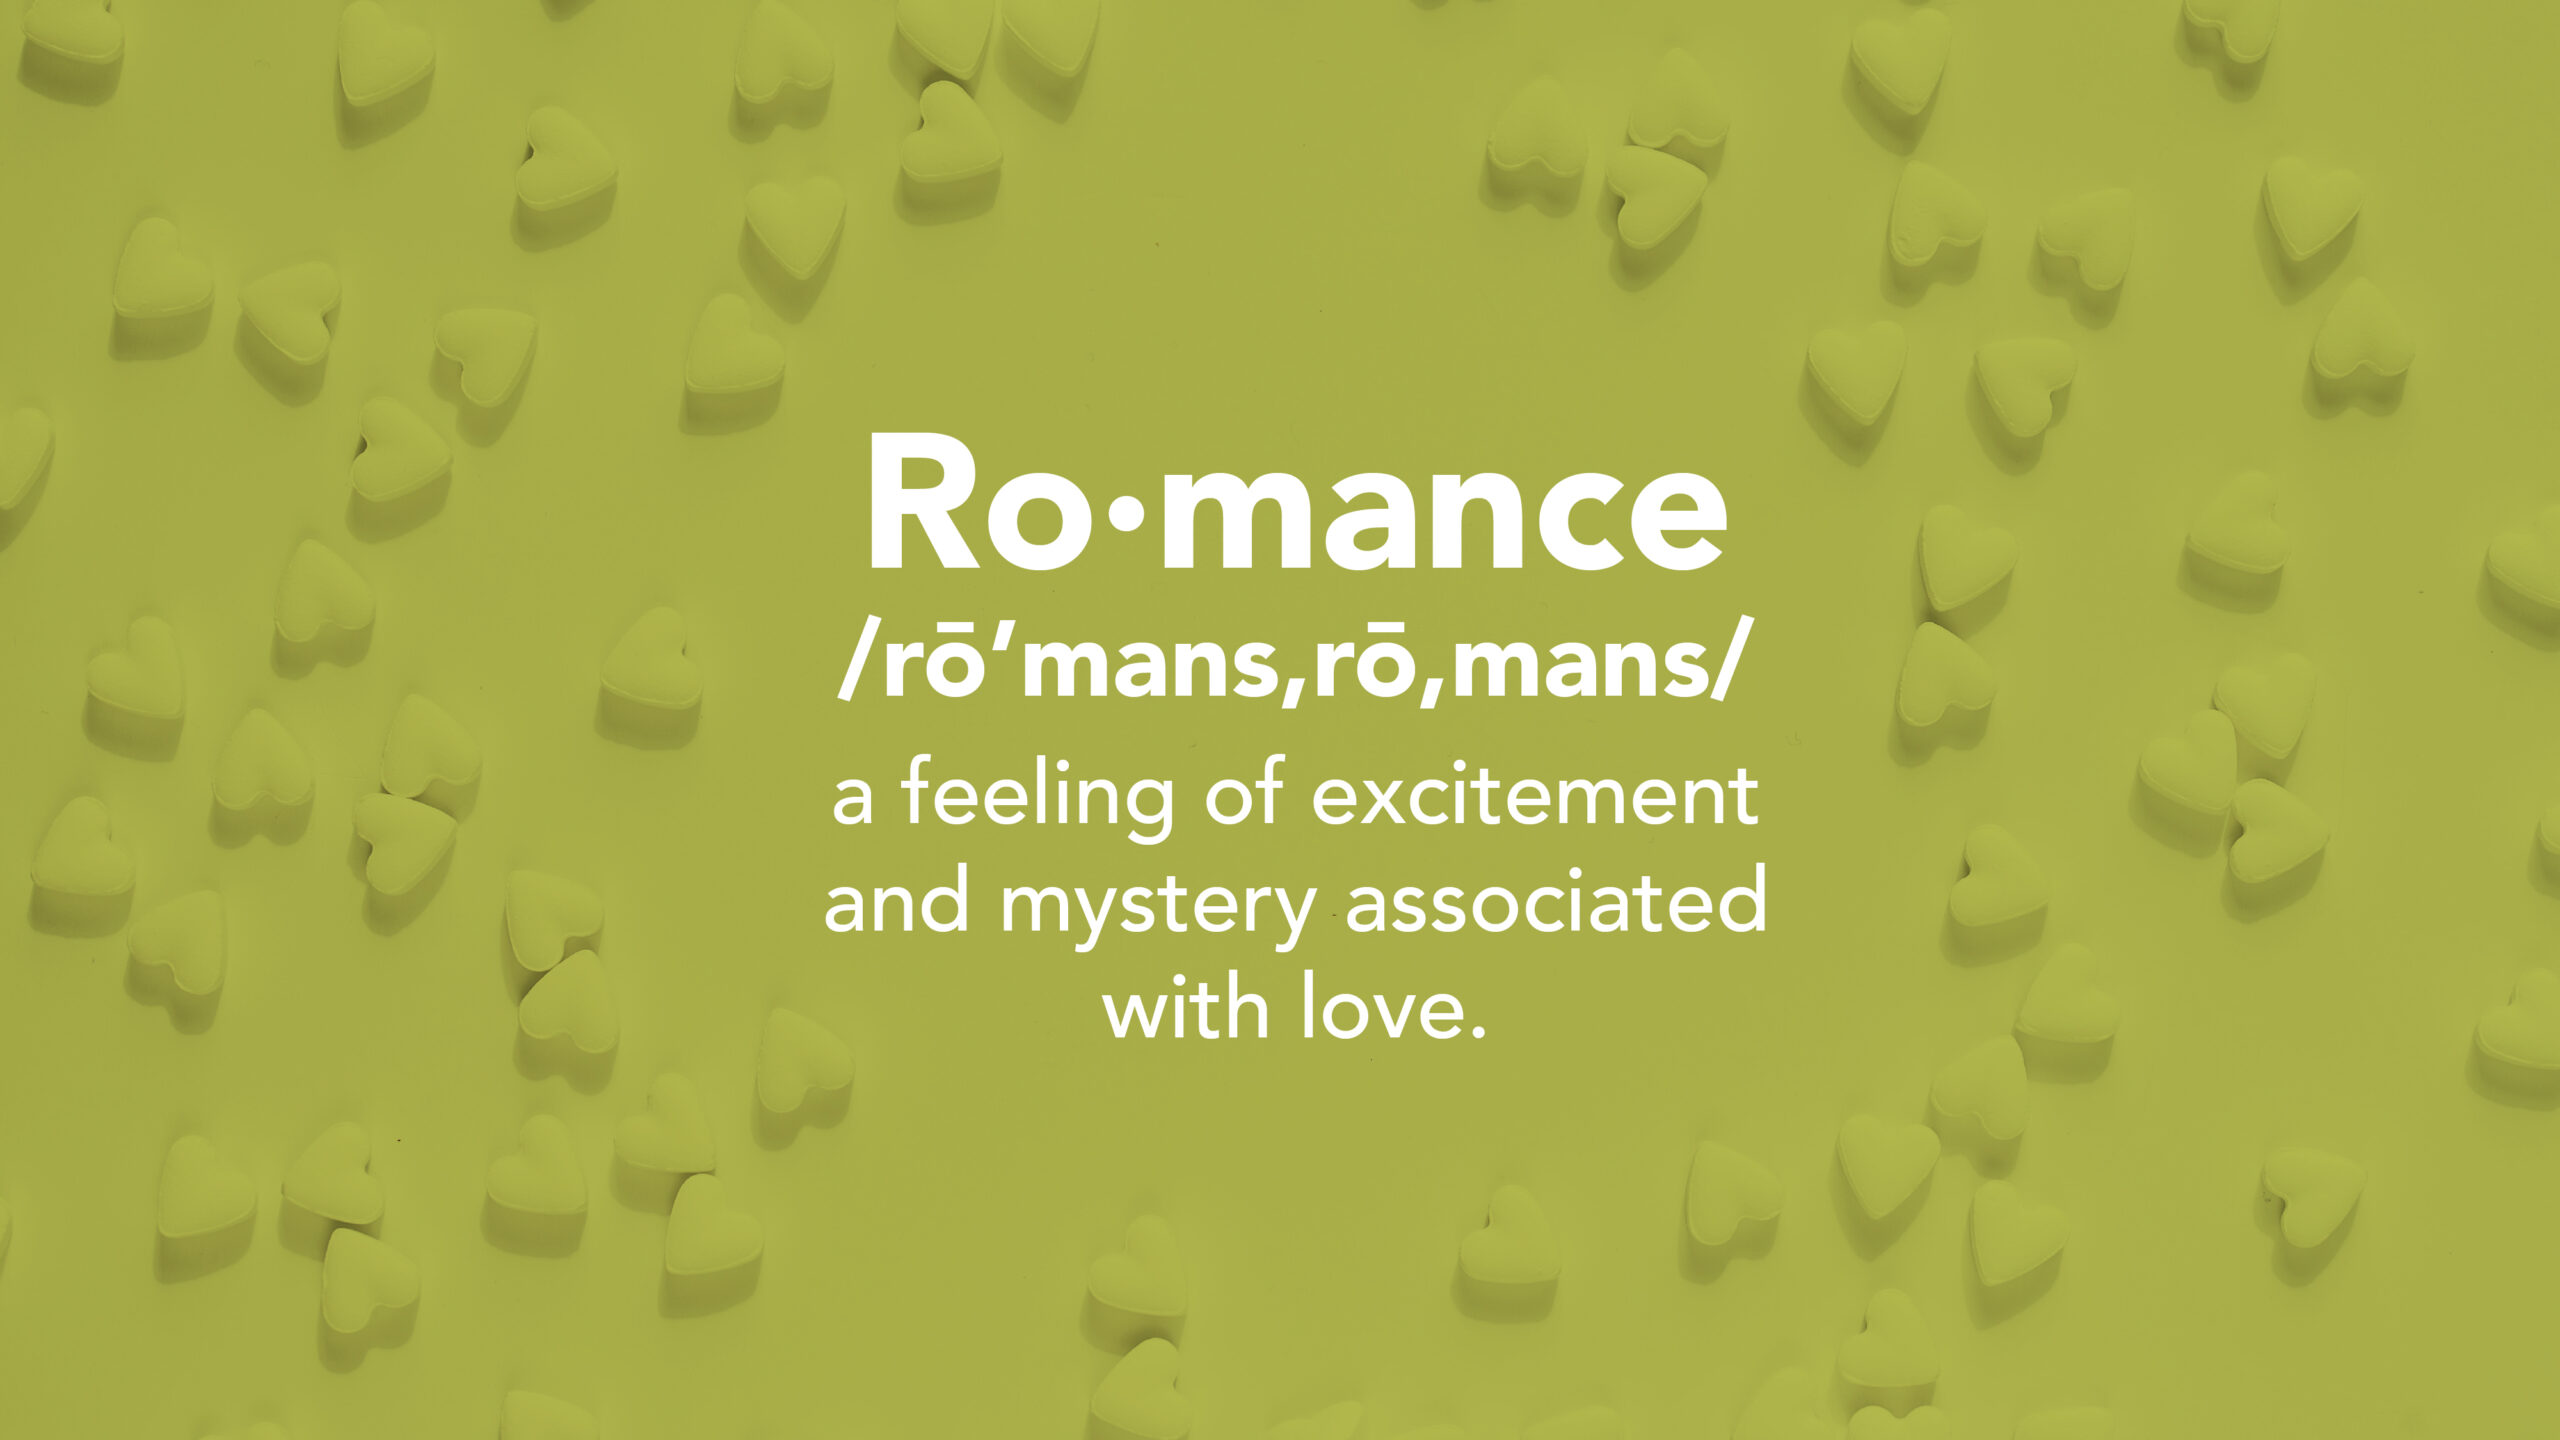 Romance - a feeling of excitement and mystery associated with love